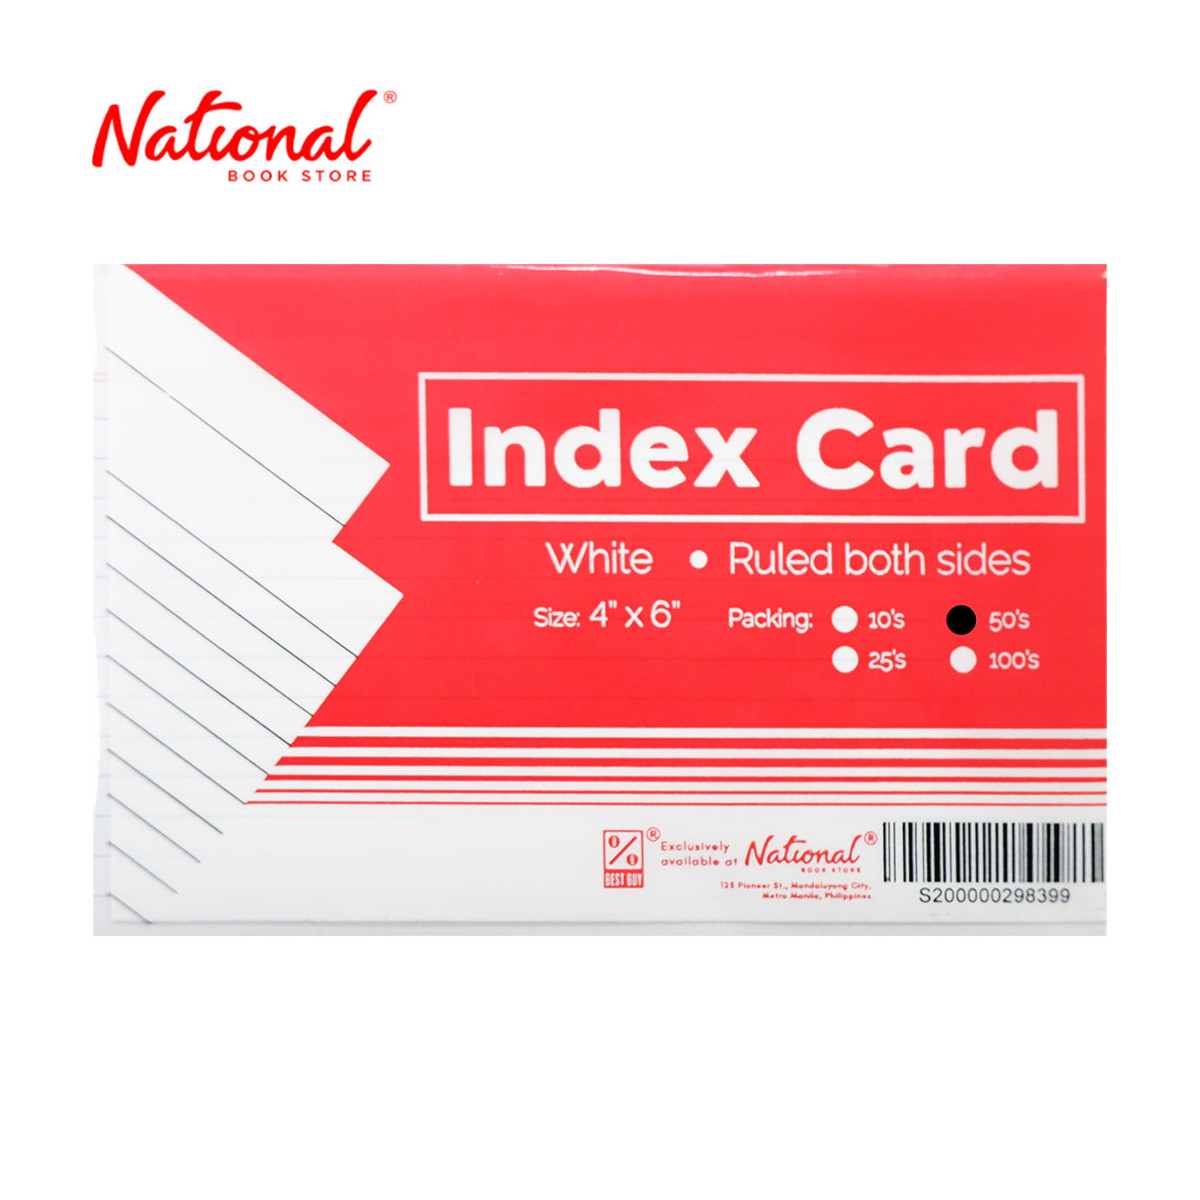 Best Buy Index Card White 4x6 50's Ruled Both Sides - School & Office Supplies